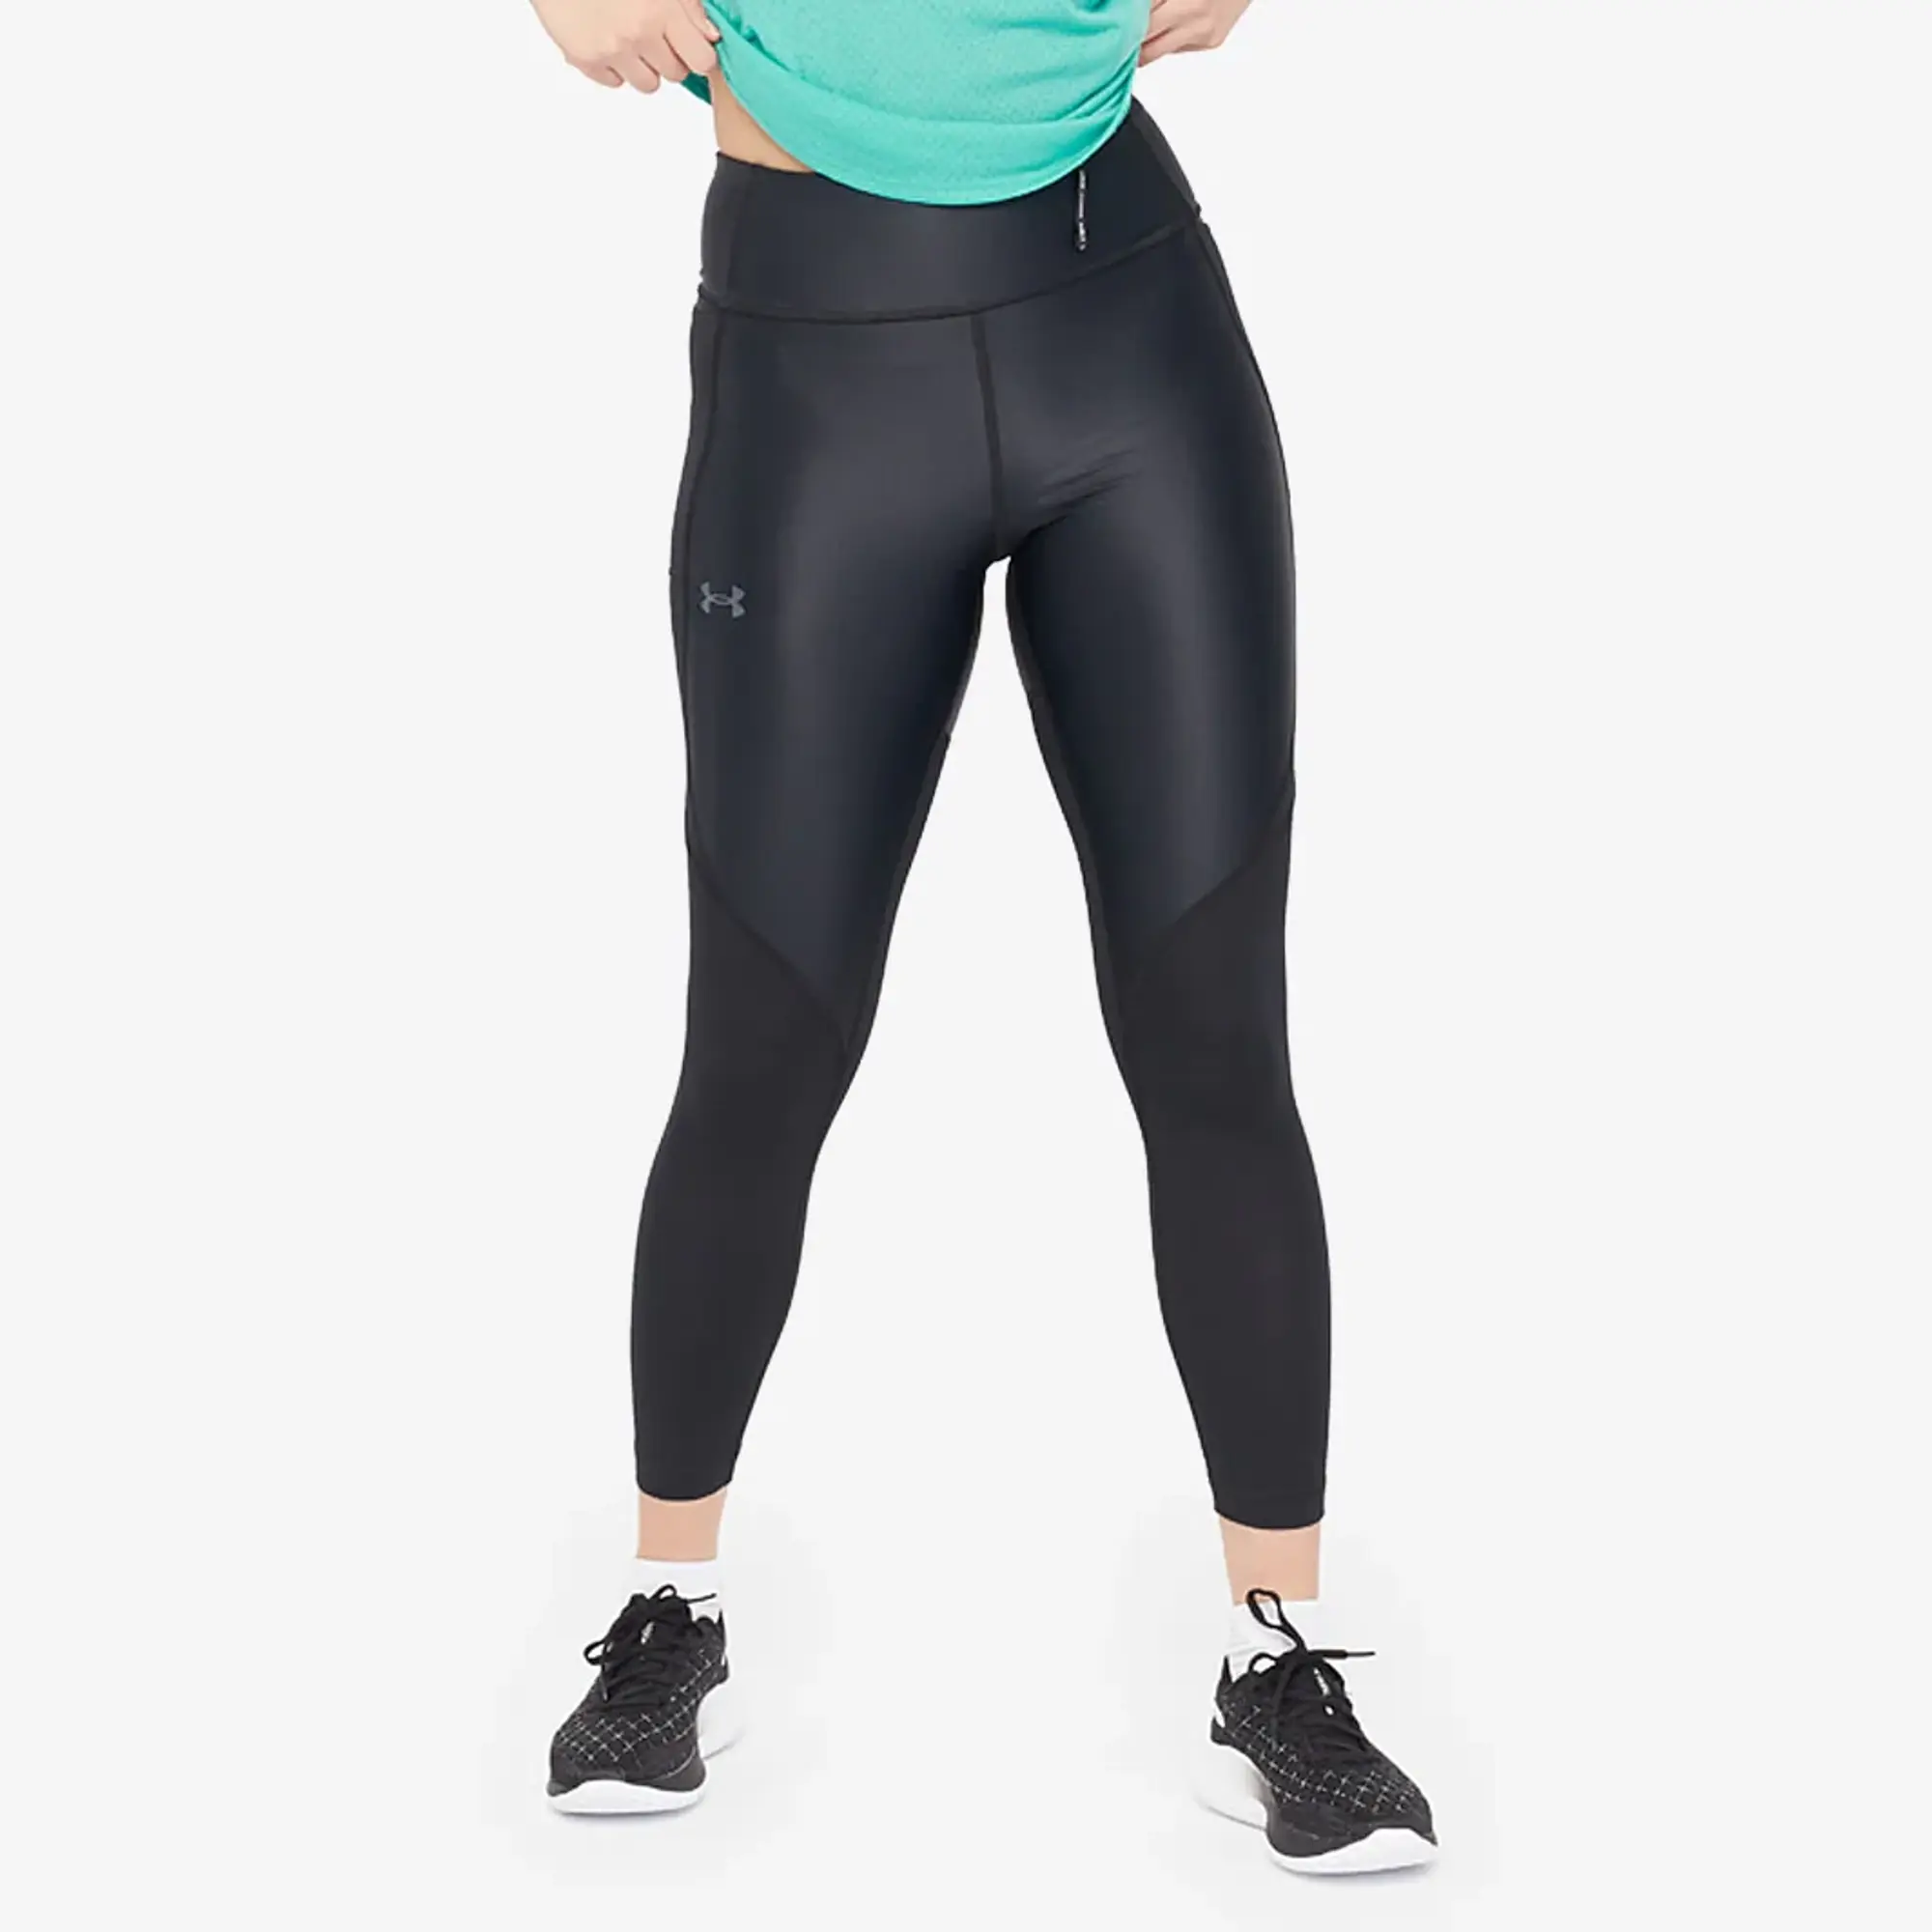 Under Armour Iso-Chill Run 7/8 Tights - Black/Reflective - XL